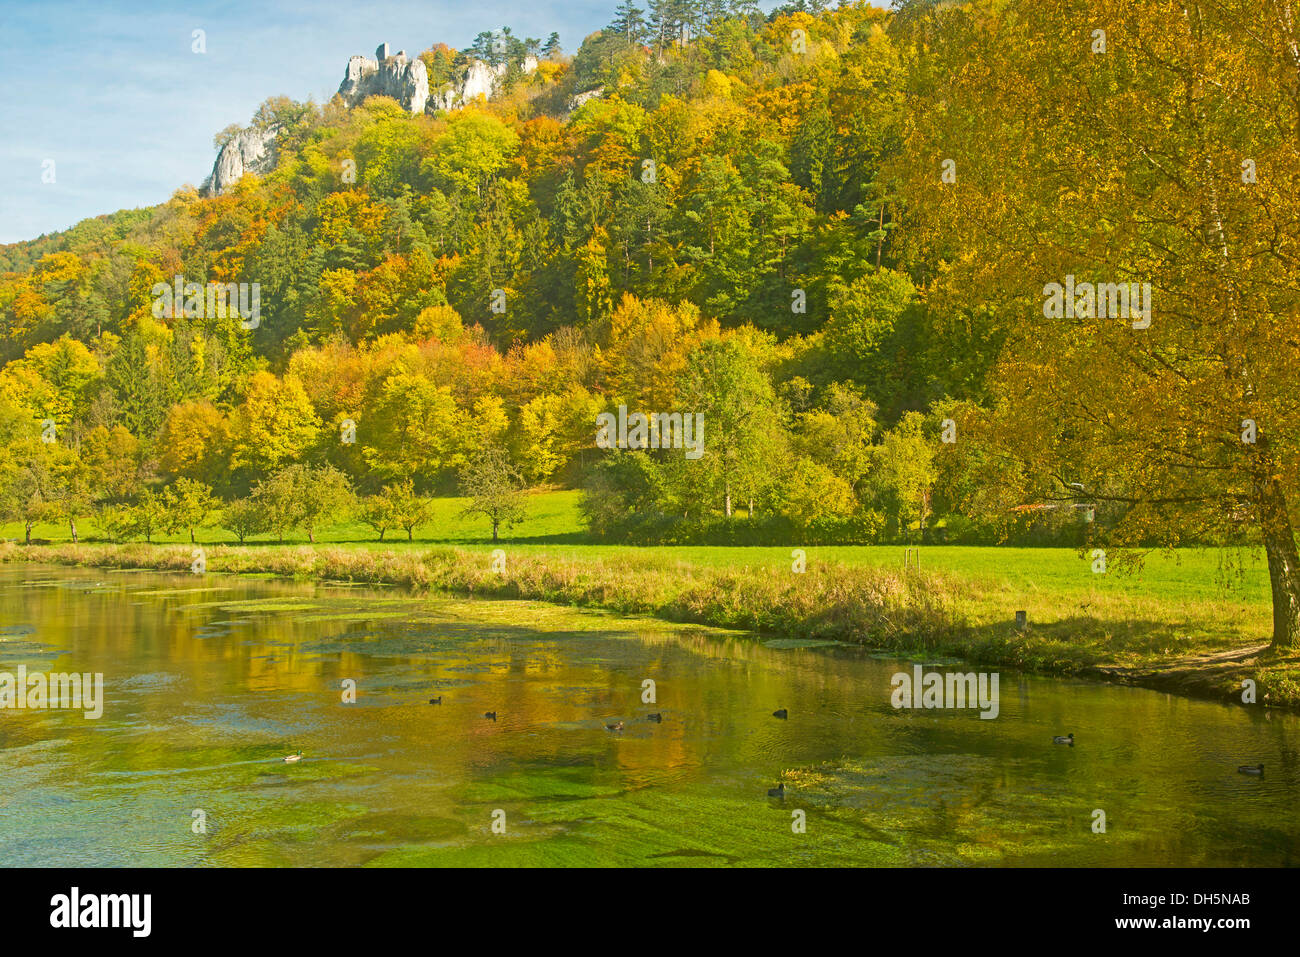 Blau river and the Blautal valley, Hohengerhausen castle ruin or Rusenschloss castle ruin at the back, situated on a hill above Stock Photo